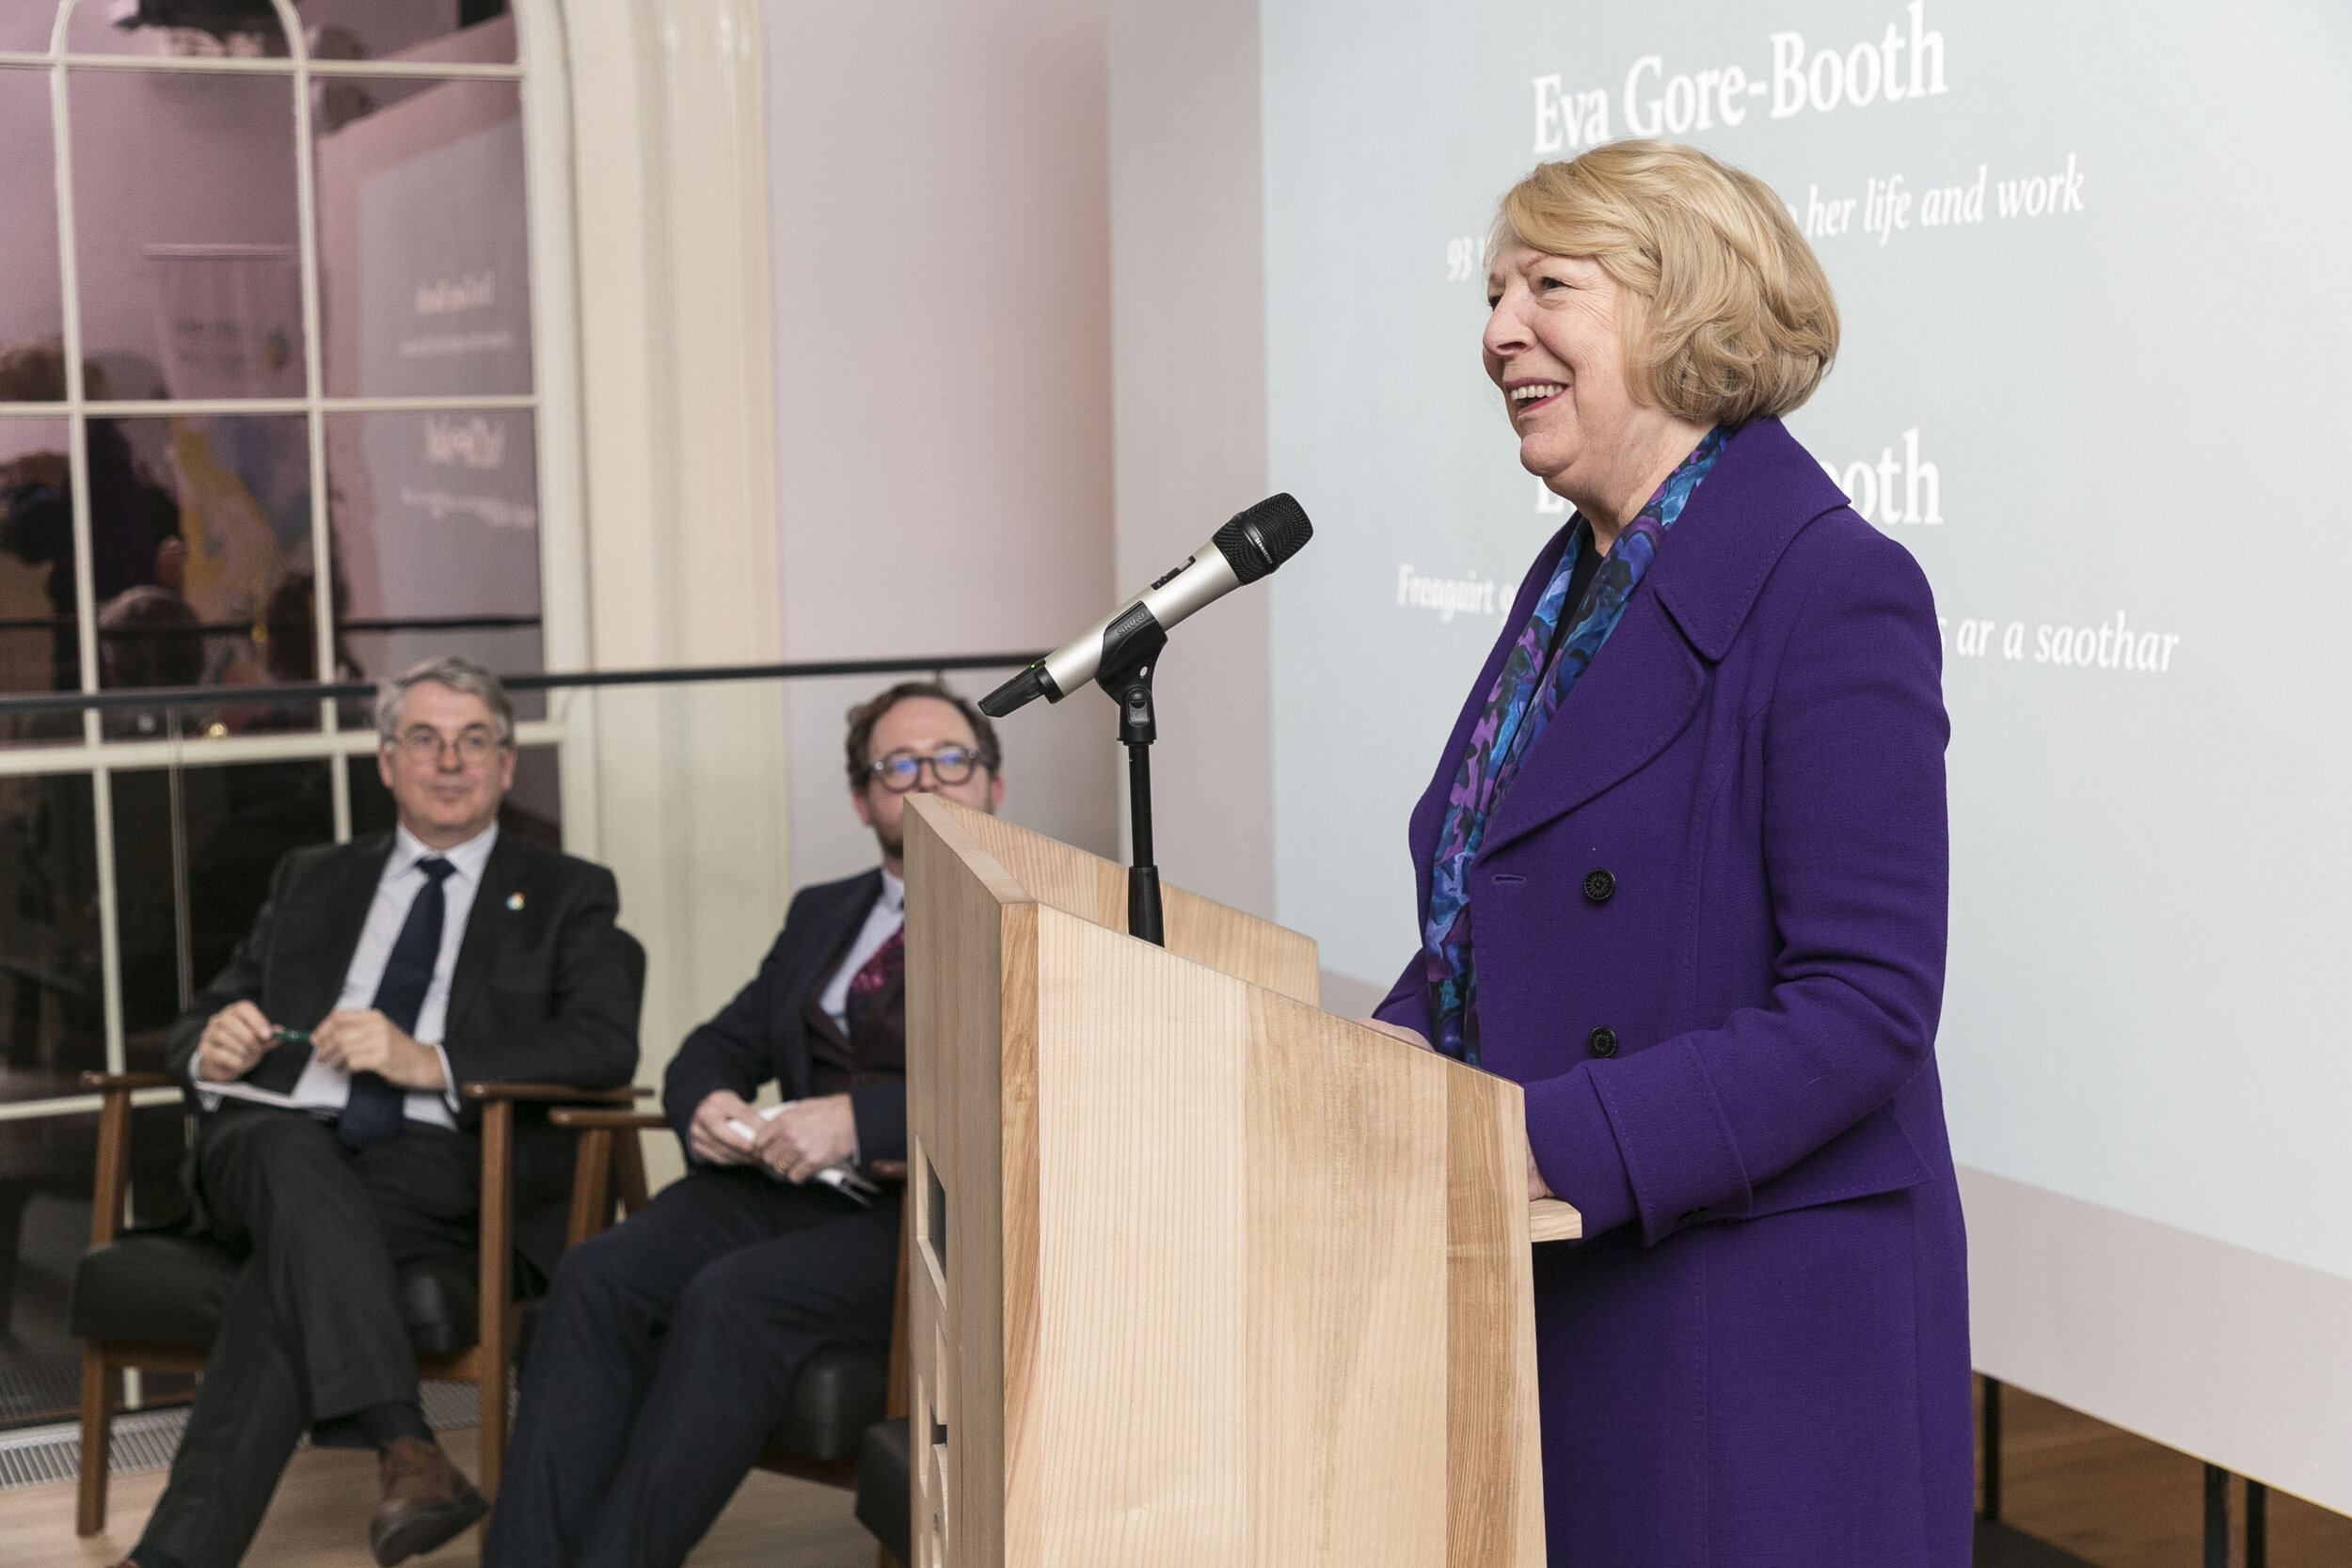  Sabina Higgins gives an inpsiring memorable address on the life and legacy of Eva Gore-Booth.    Hamilton Gallery / MoLi / DFAT - exhibition opening by Sabina Higgins of "Eva Gore-Booth 93 Irish women artists respond to her life and work", part of B